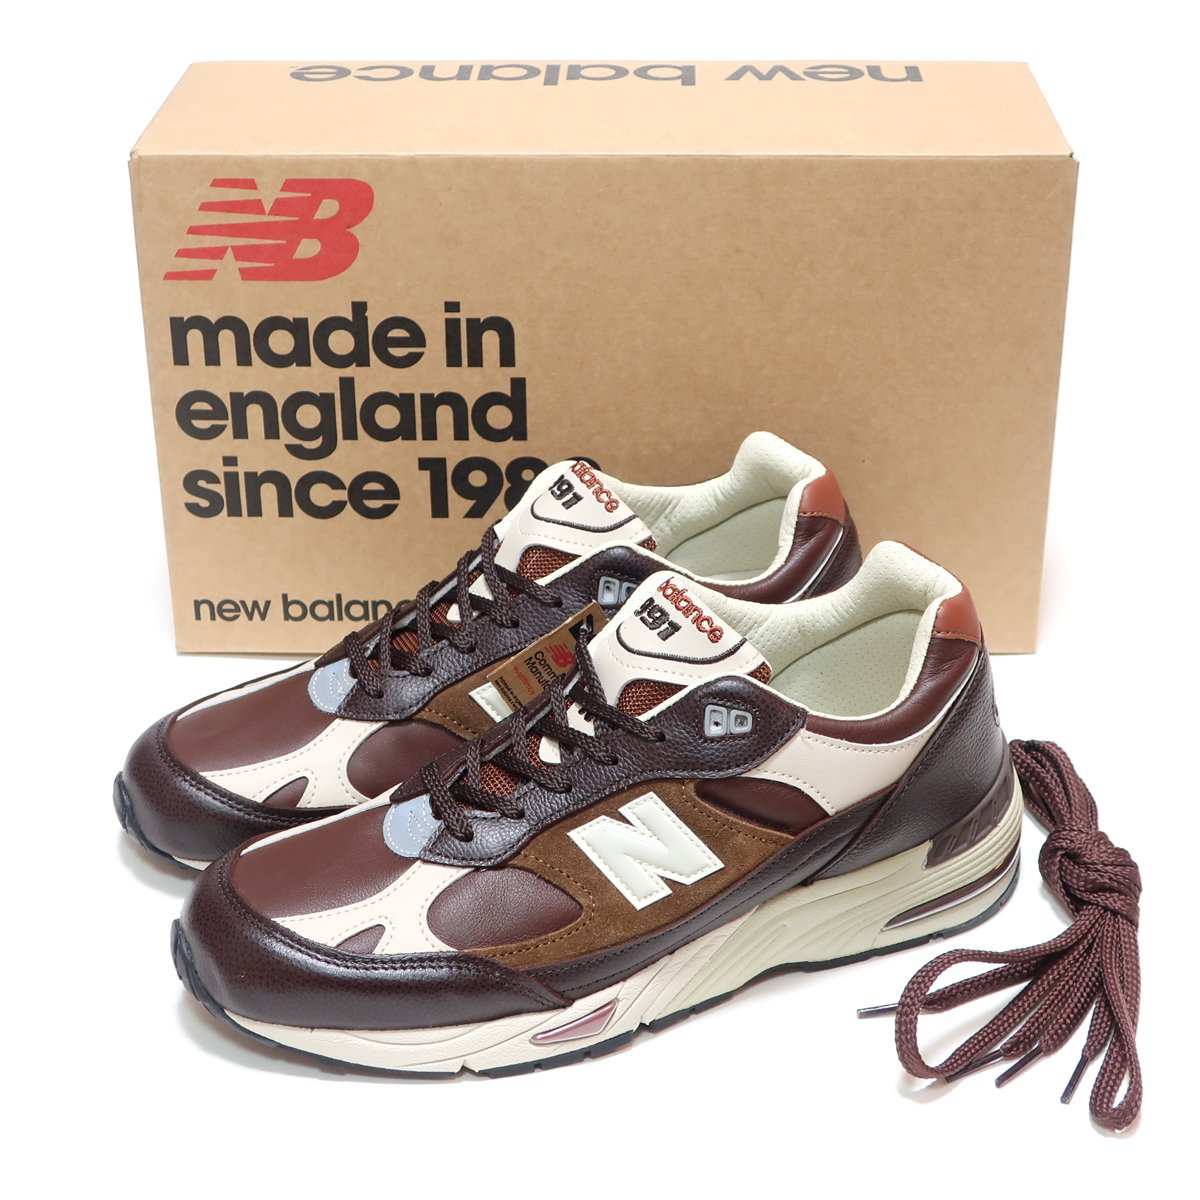 new balance M991LWS 25.5 made in England992